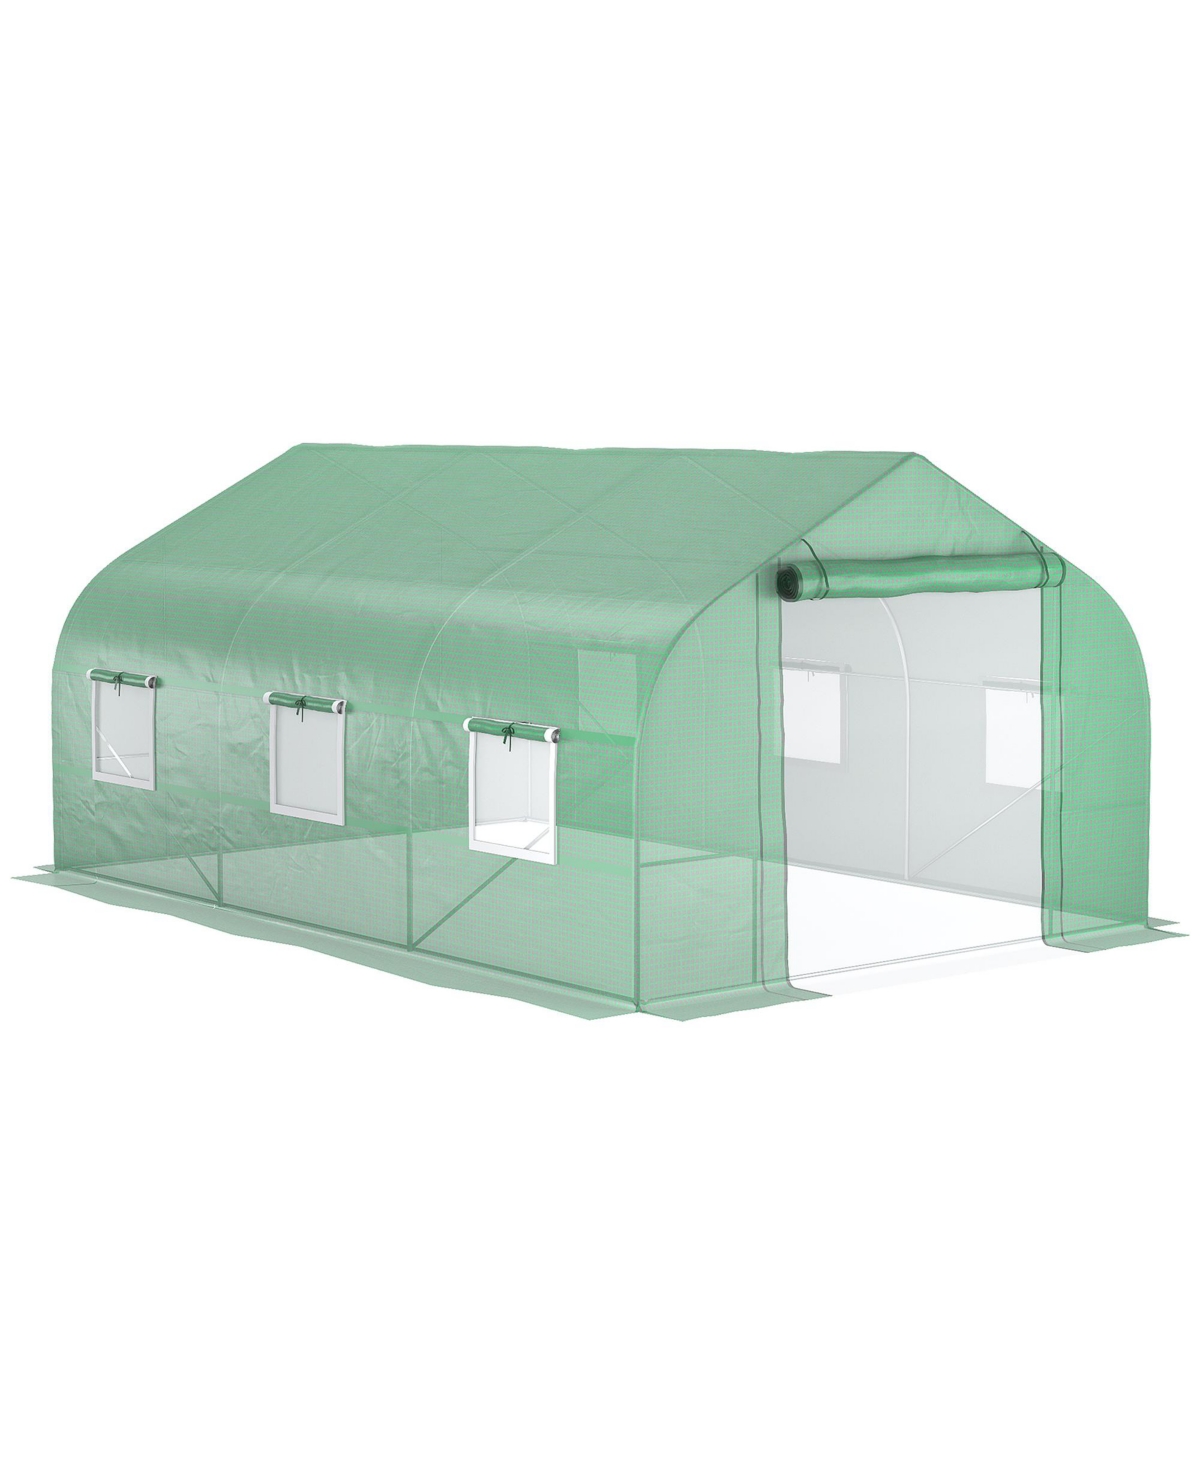 12' x 10' x 7' Outdoor Walk-In Tunnel Greenhouse Hot House with Roll-up Windows, Zippered Door, Pe Cover, Green - Green